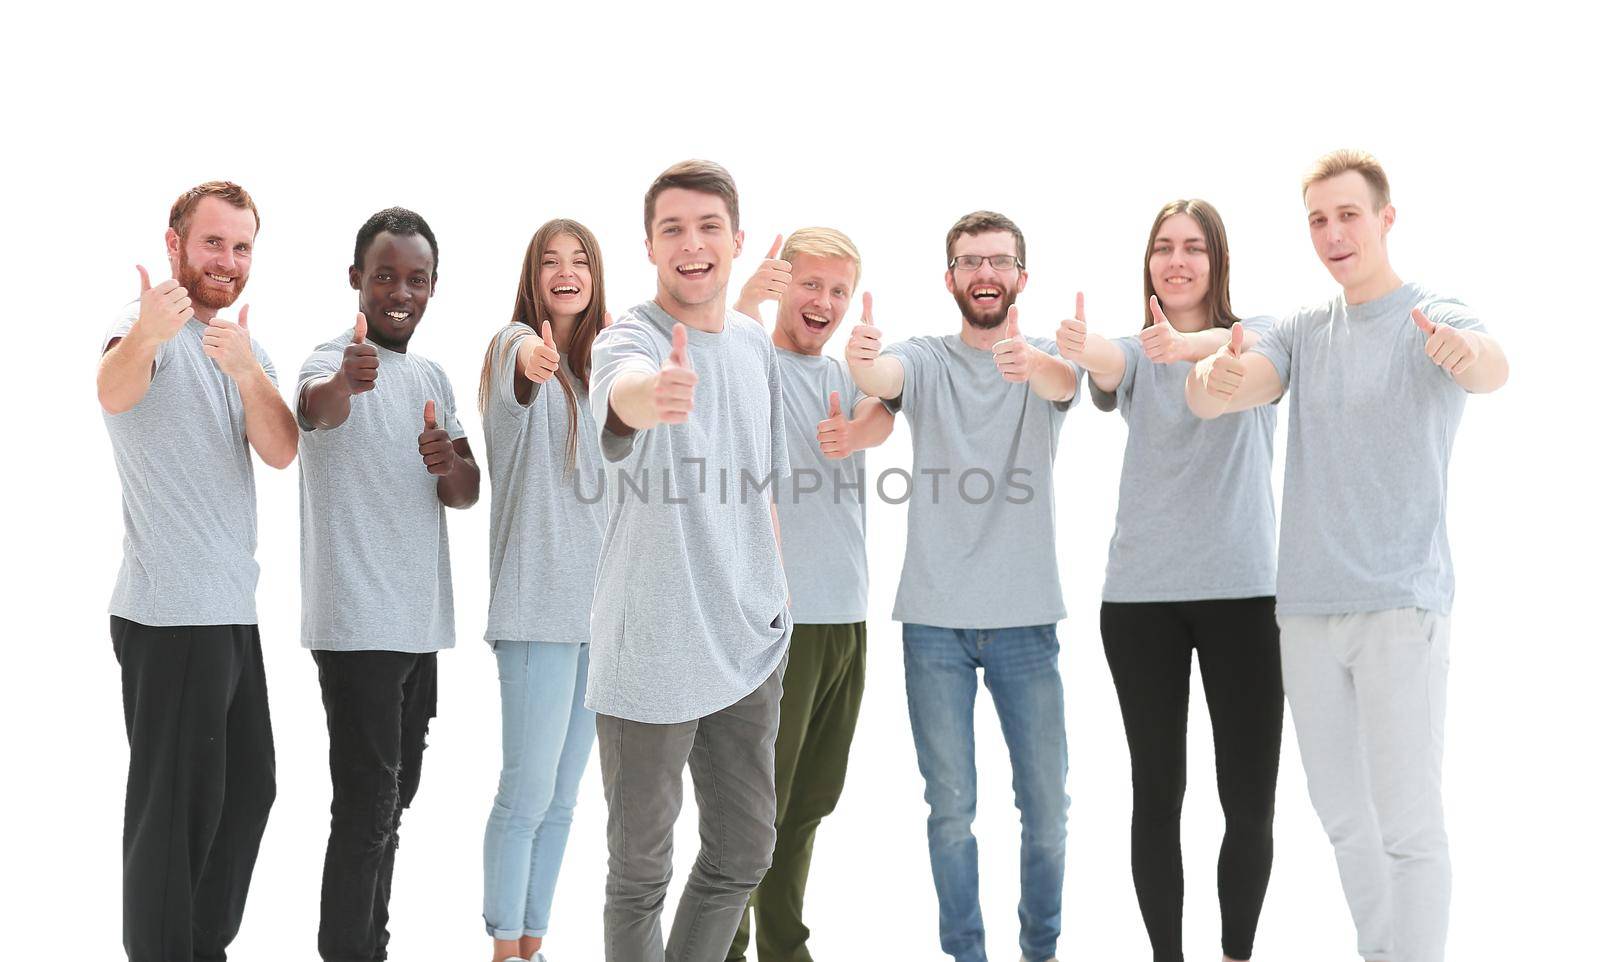 group of smiling young people showing thumbs up. photo with copy space